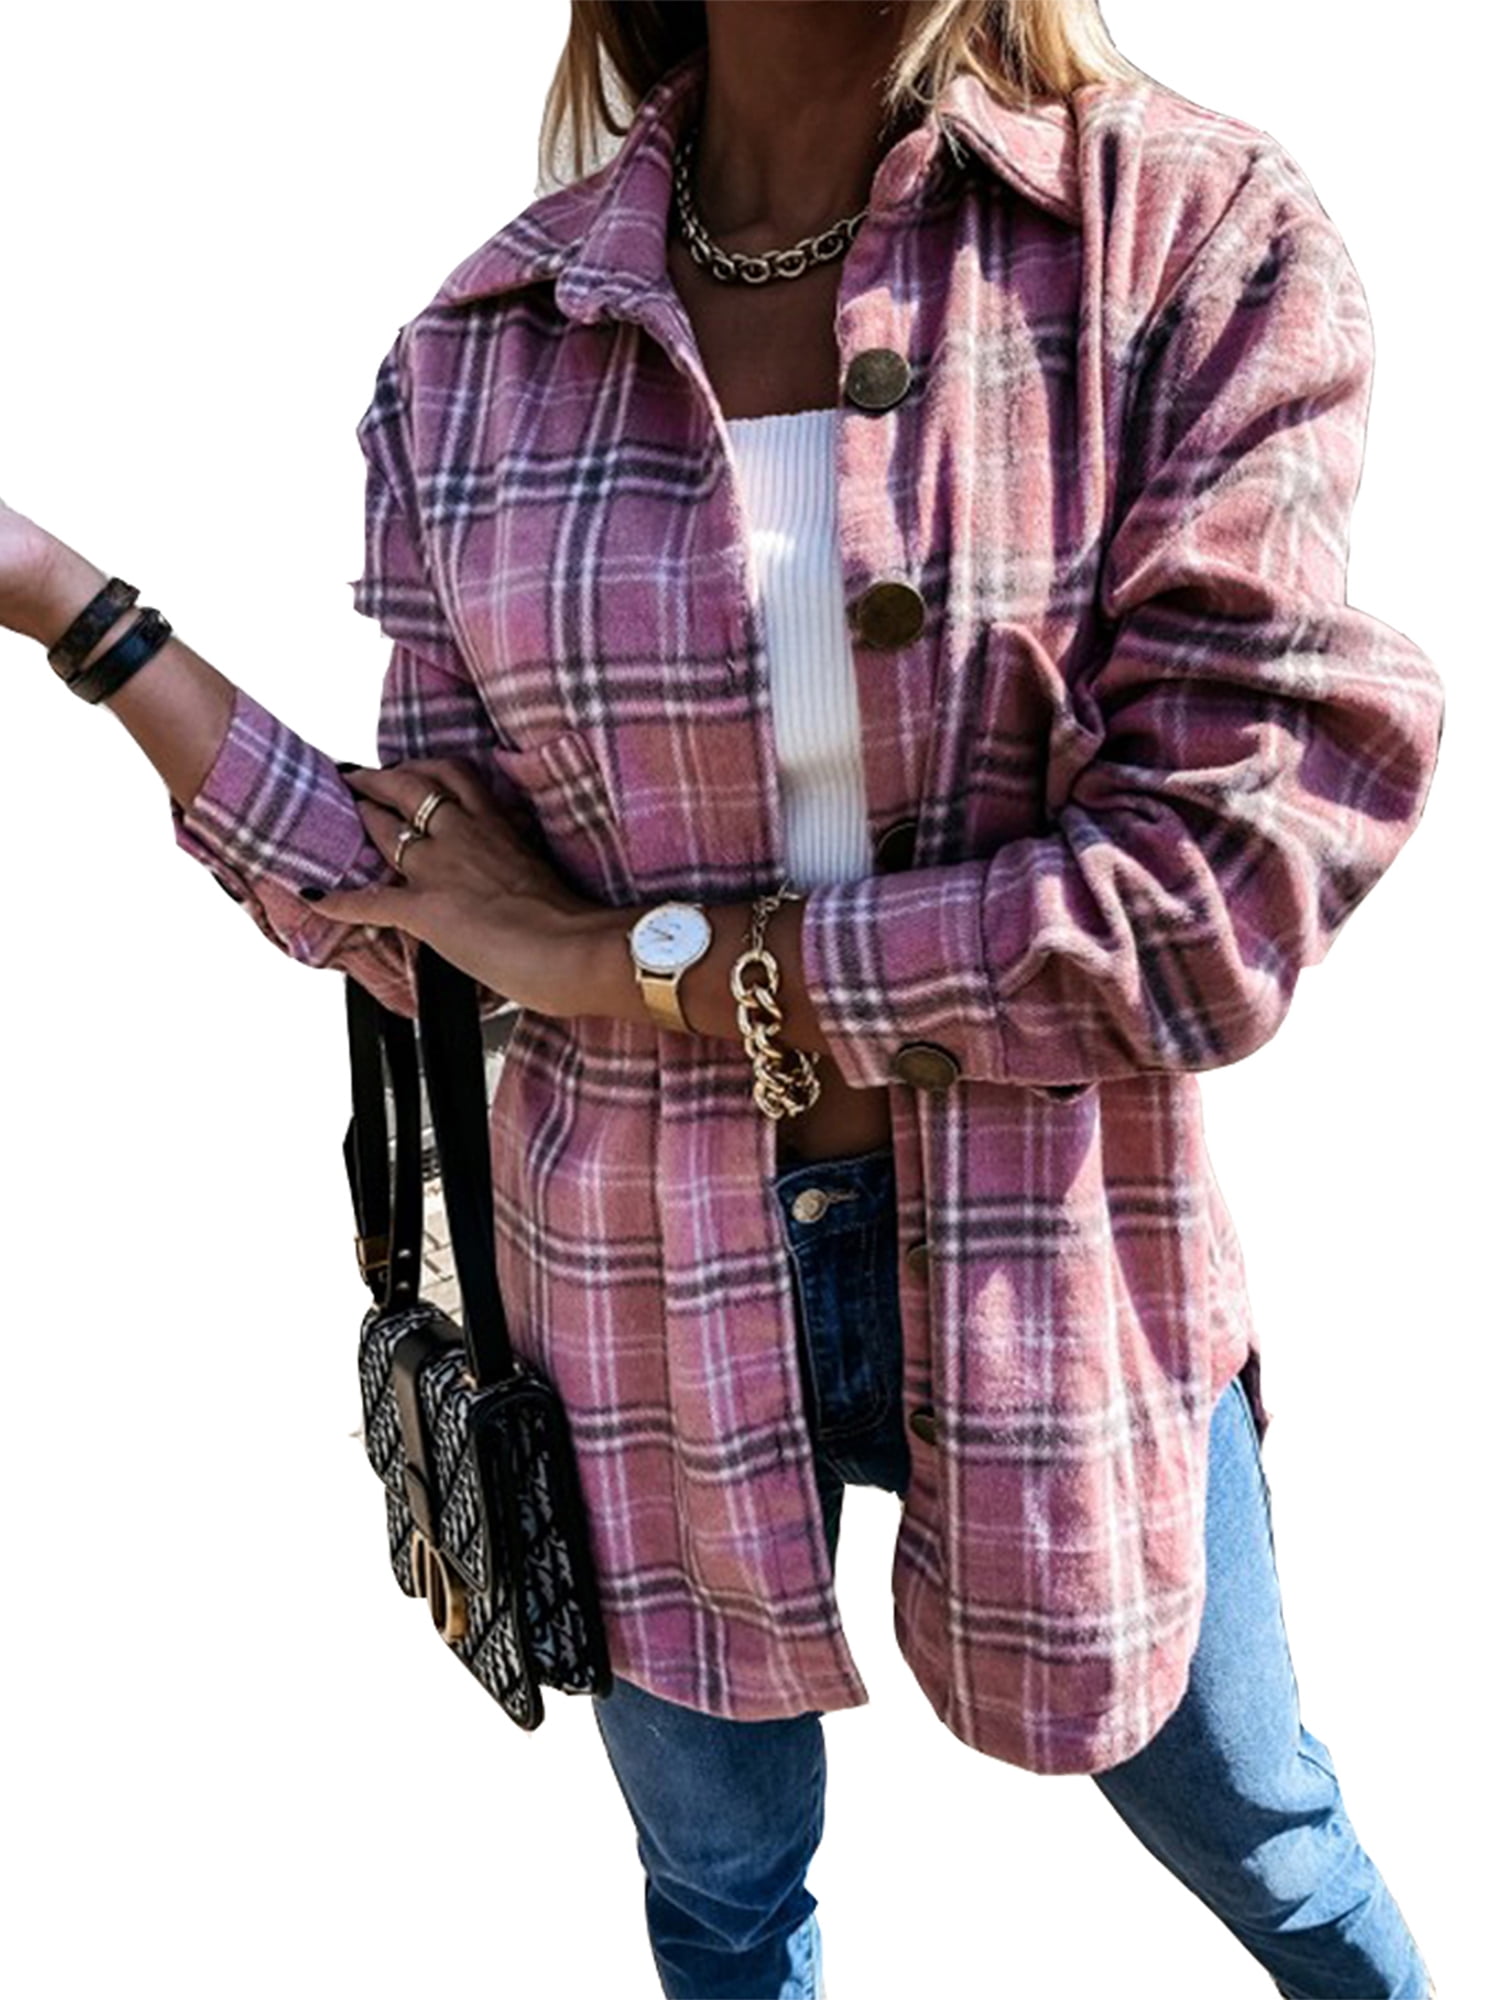 Sunisery Flannel Shirts for Women Plaid Jacket Long Sleeve Button